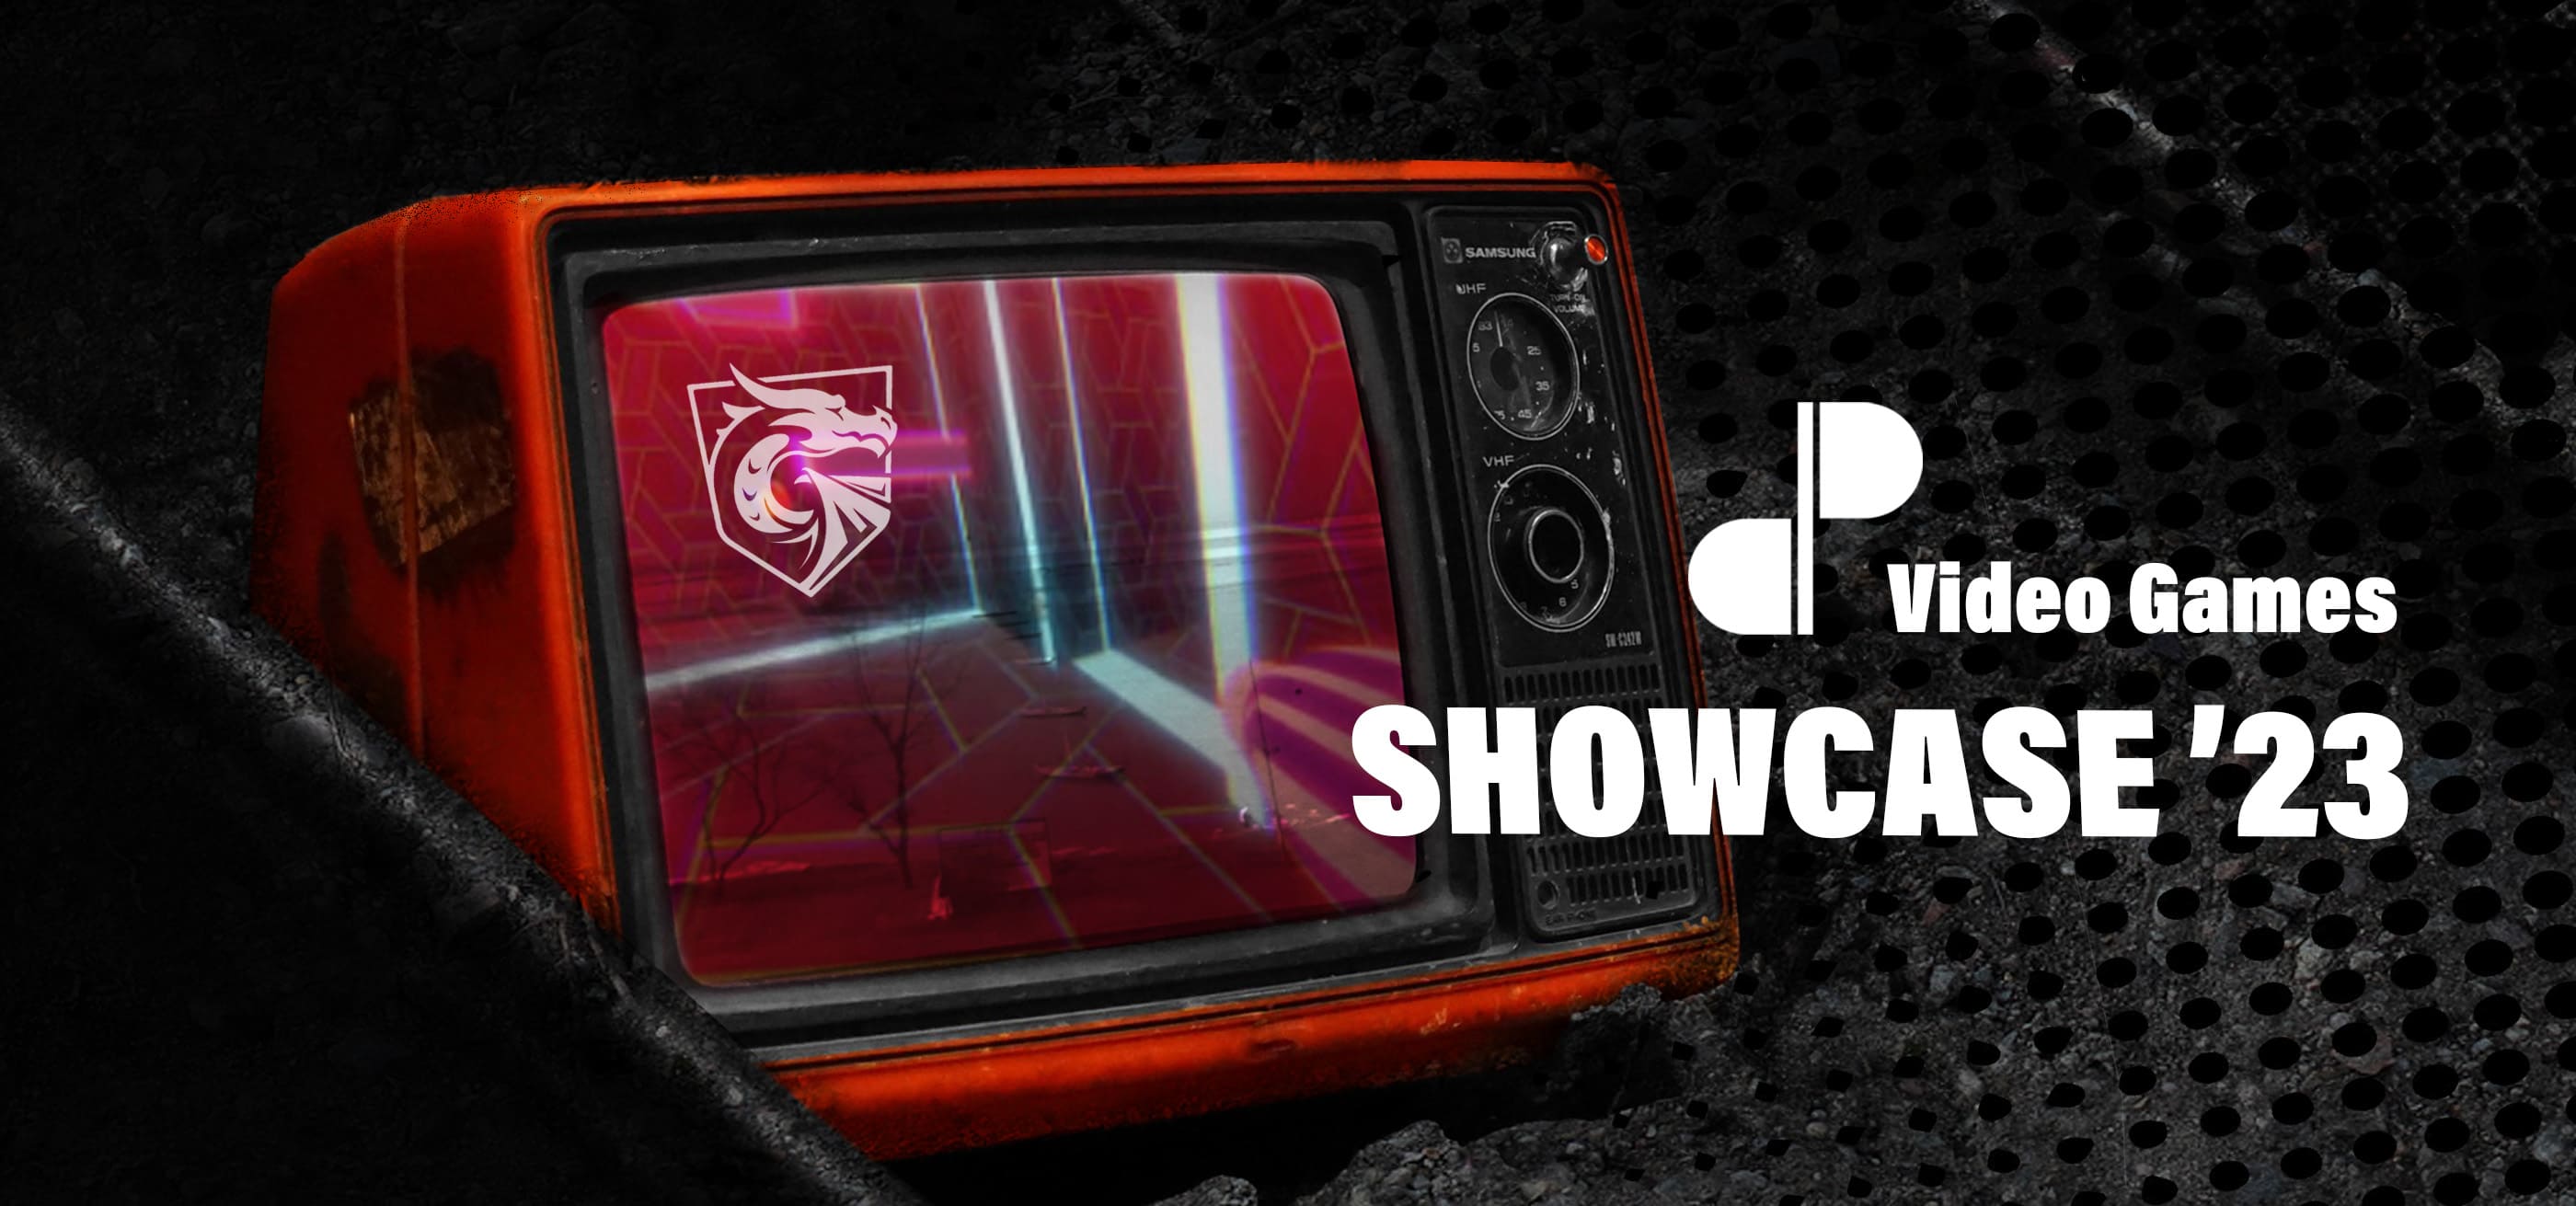 A Banner composed of the image of an old red television displaying a futuristic video game image with the Dragons shield of DigiPen, and a text that says: Video Games Showcase 2023. 